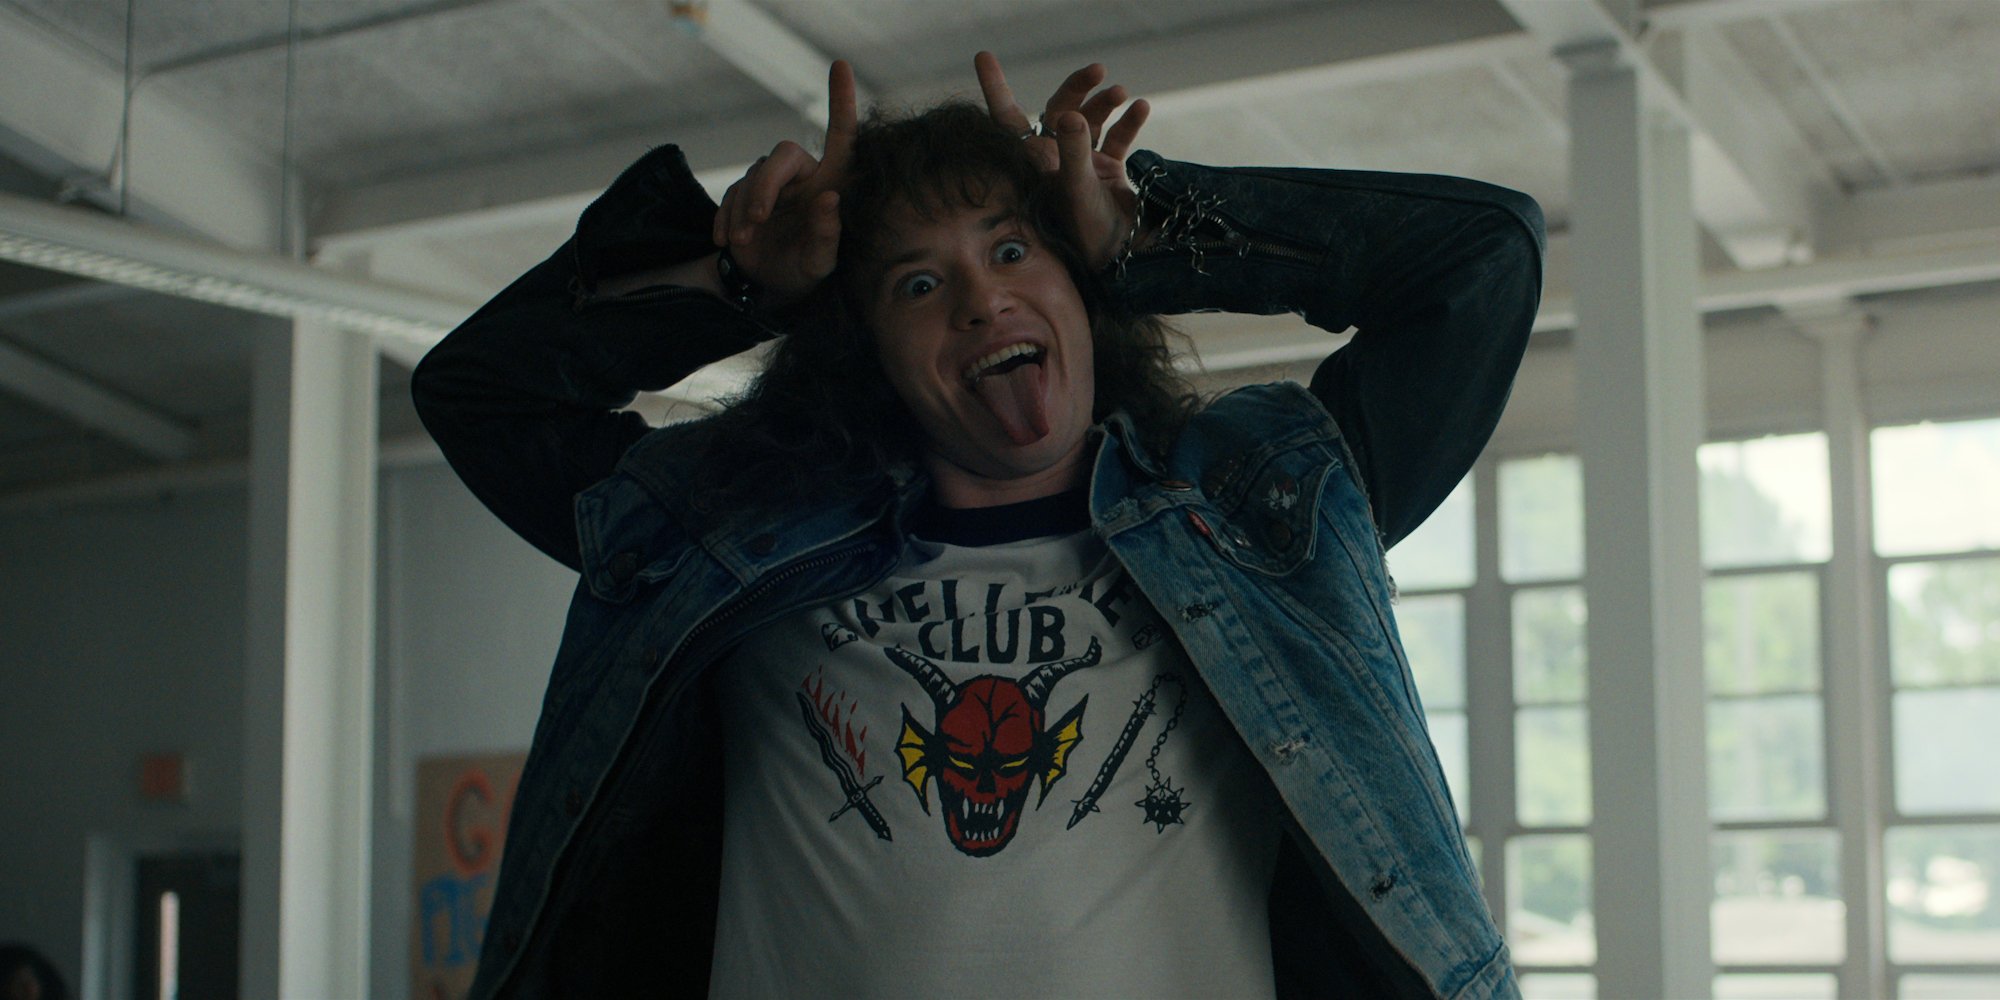 'Stranger Things 4' merchandise includes t-shirts from the Hellfire Club like the one seen here, worn by Joseph Quinn as Eddie Munson